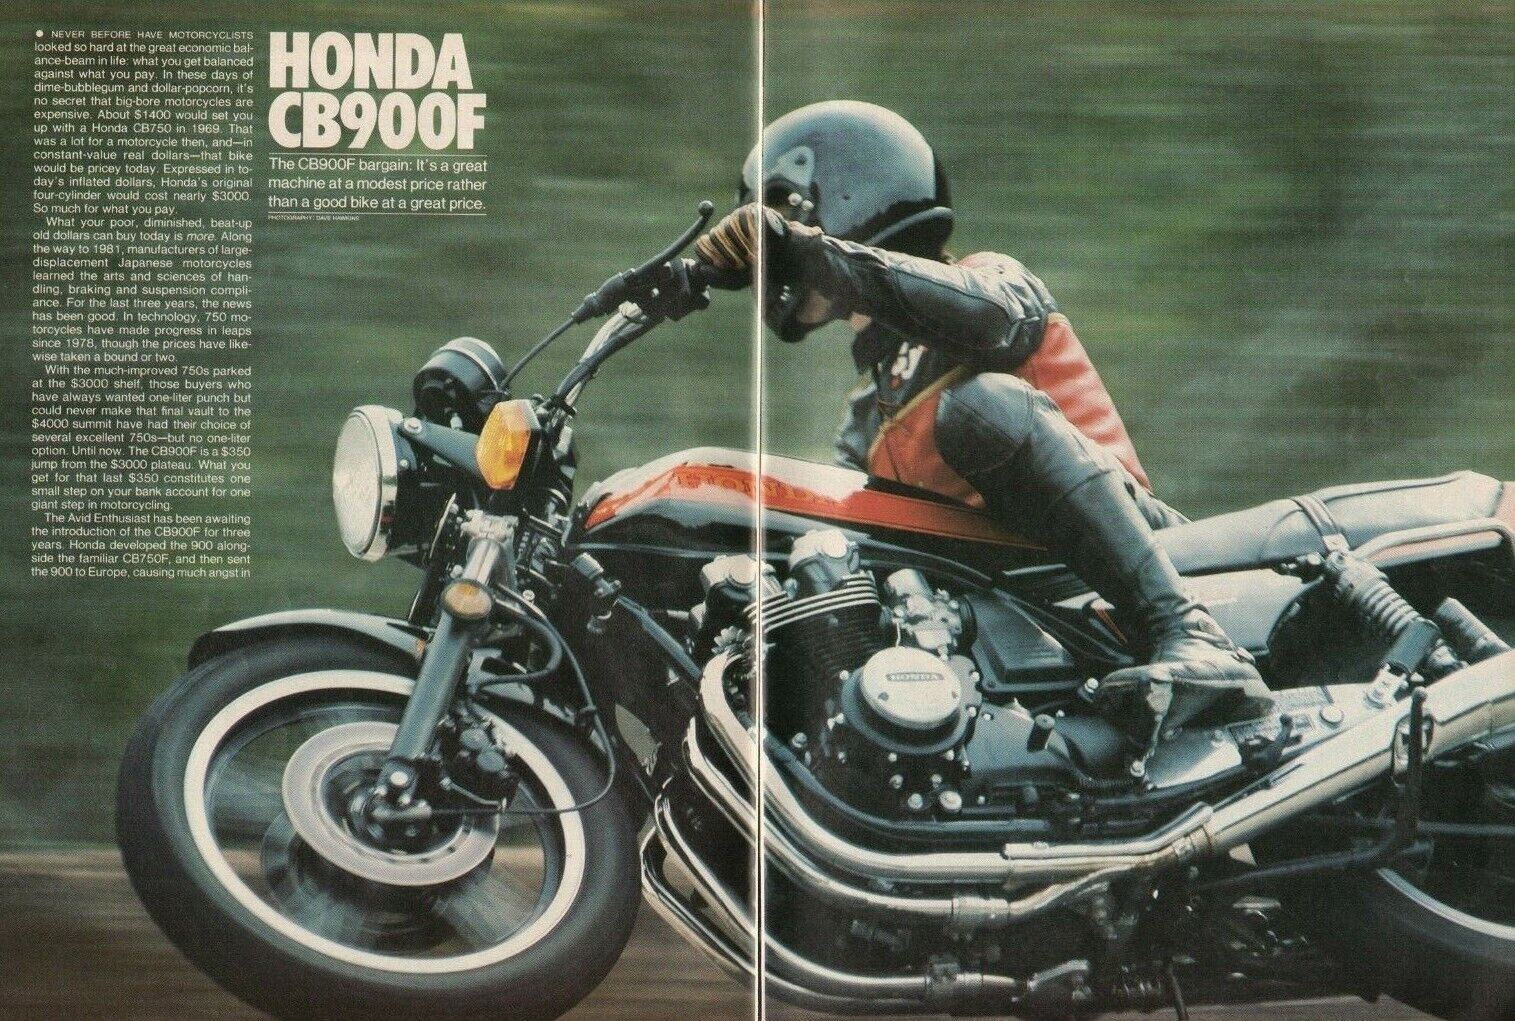 1981 Honda CB900F - 7-Page Vintage Motorcycle Road Test Article